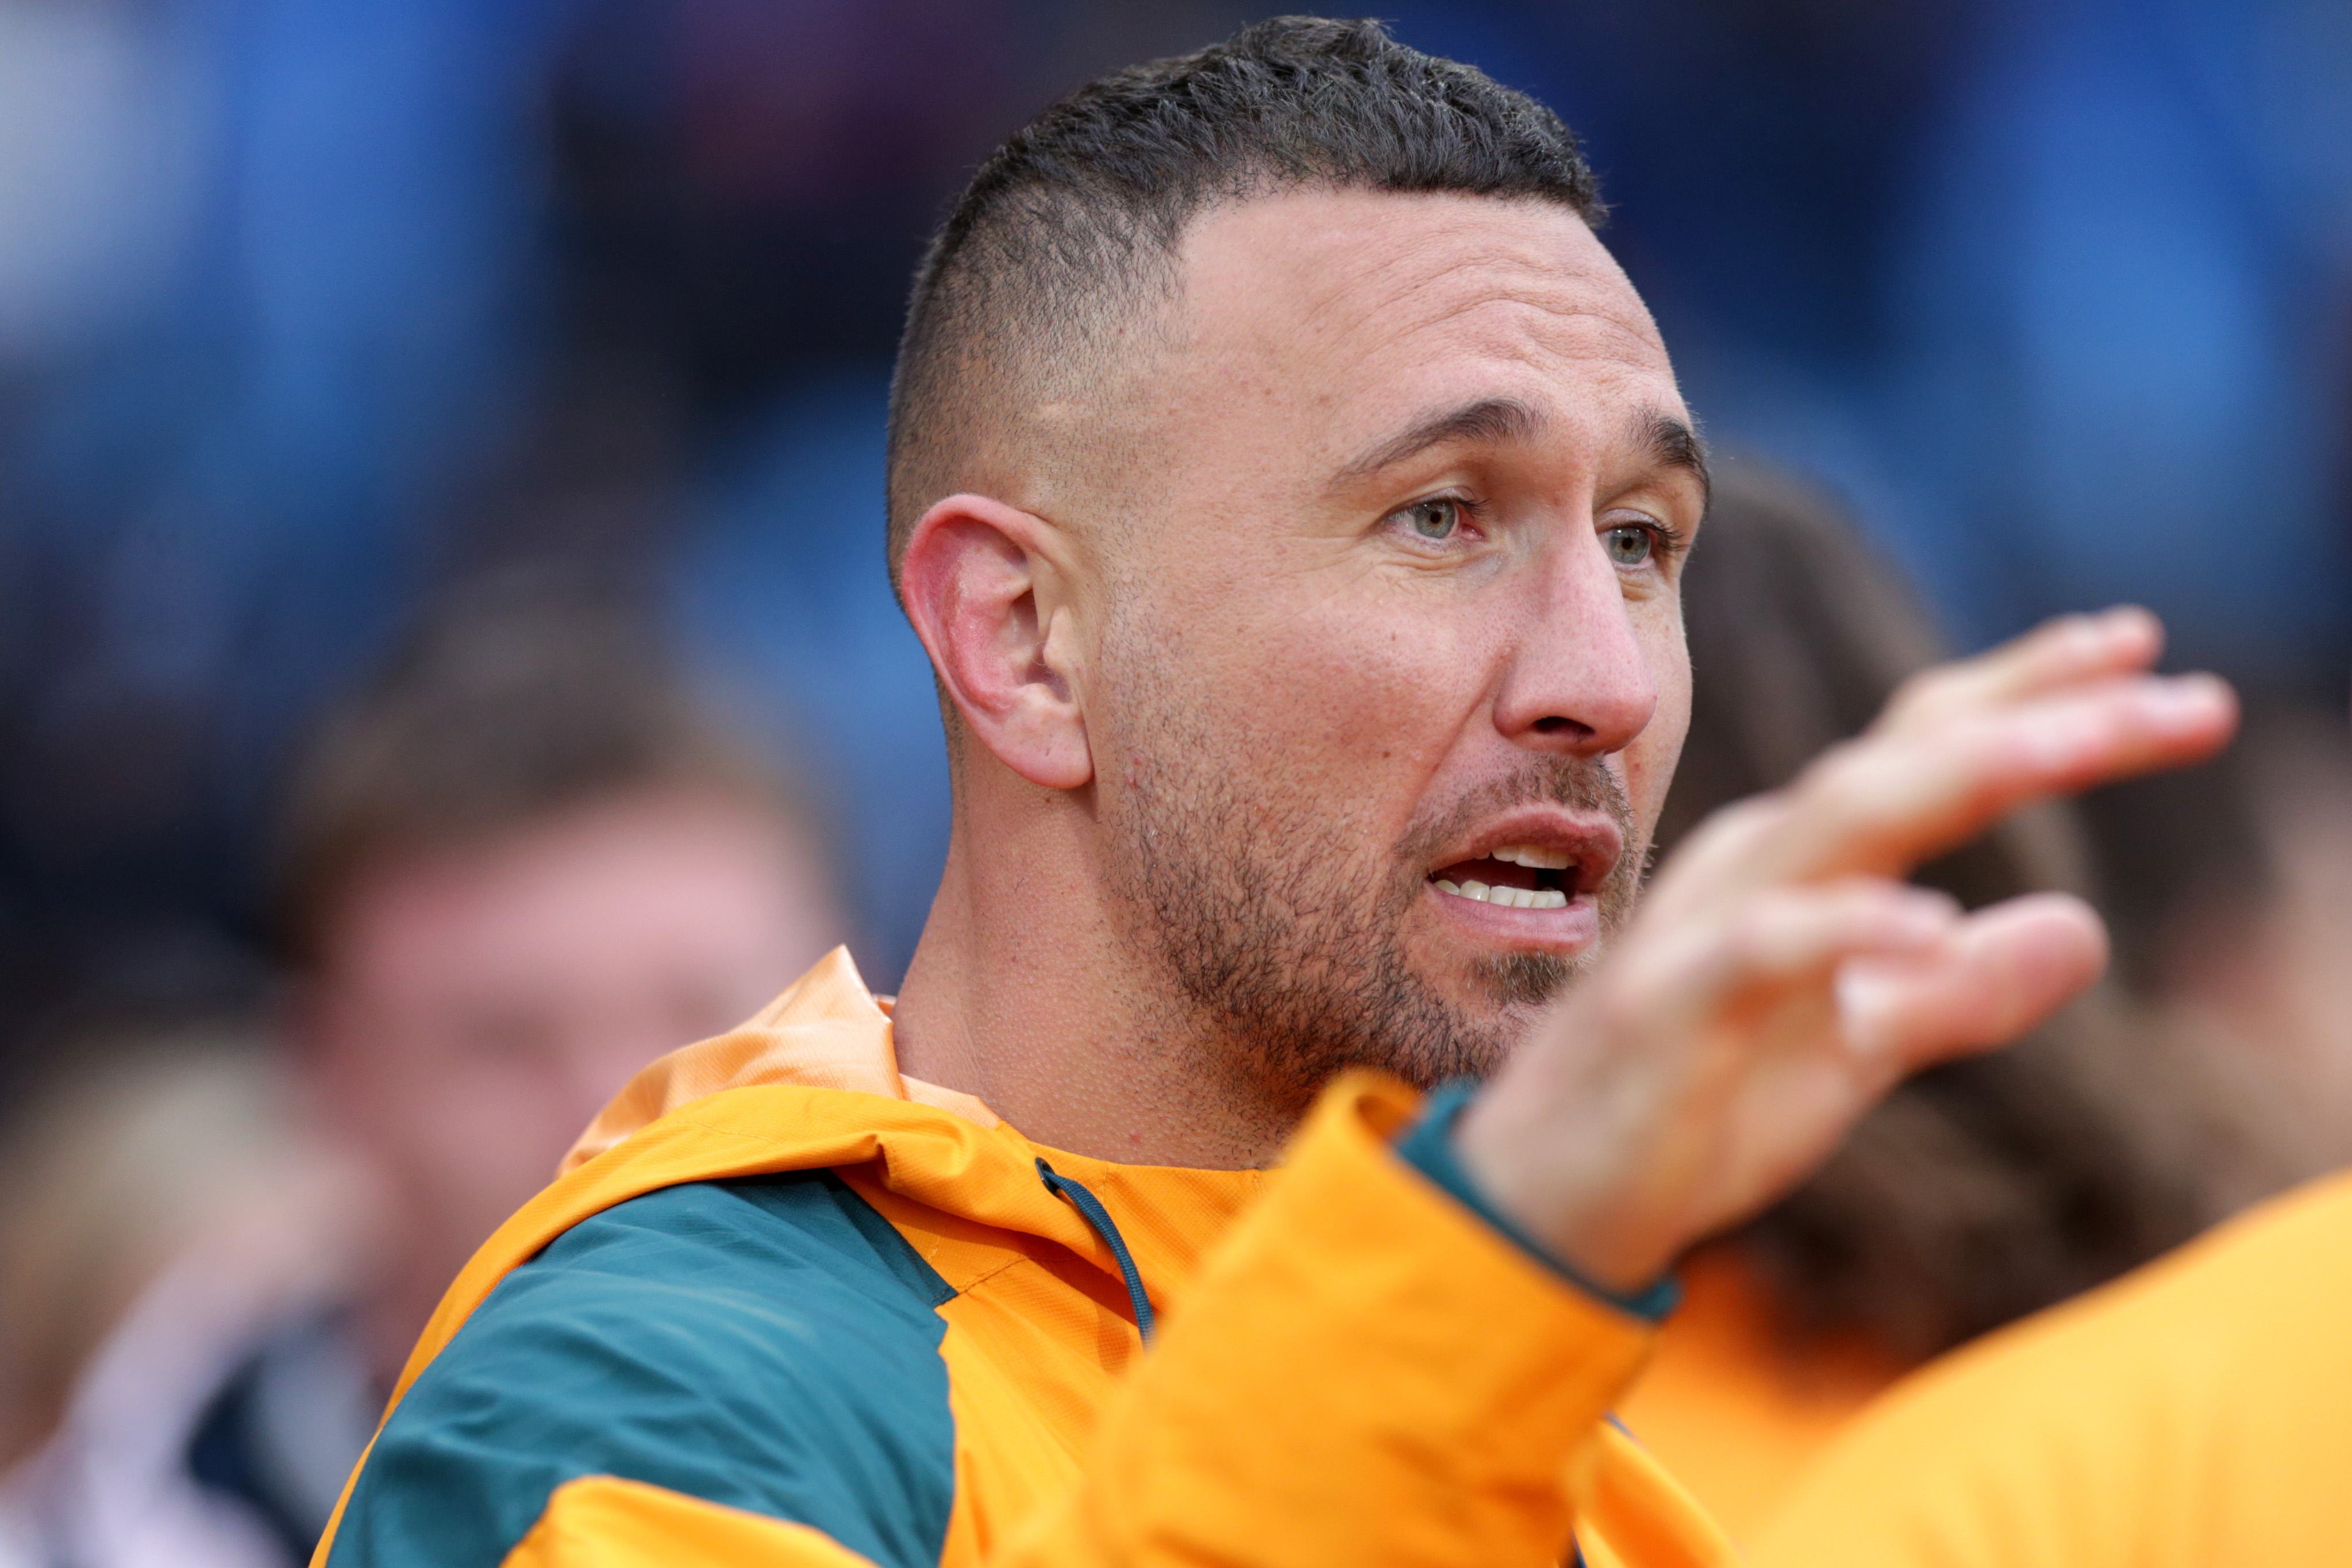 Quade Cooper talks to a teammate from the sidelines after his injury.